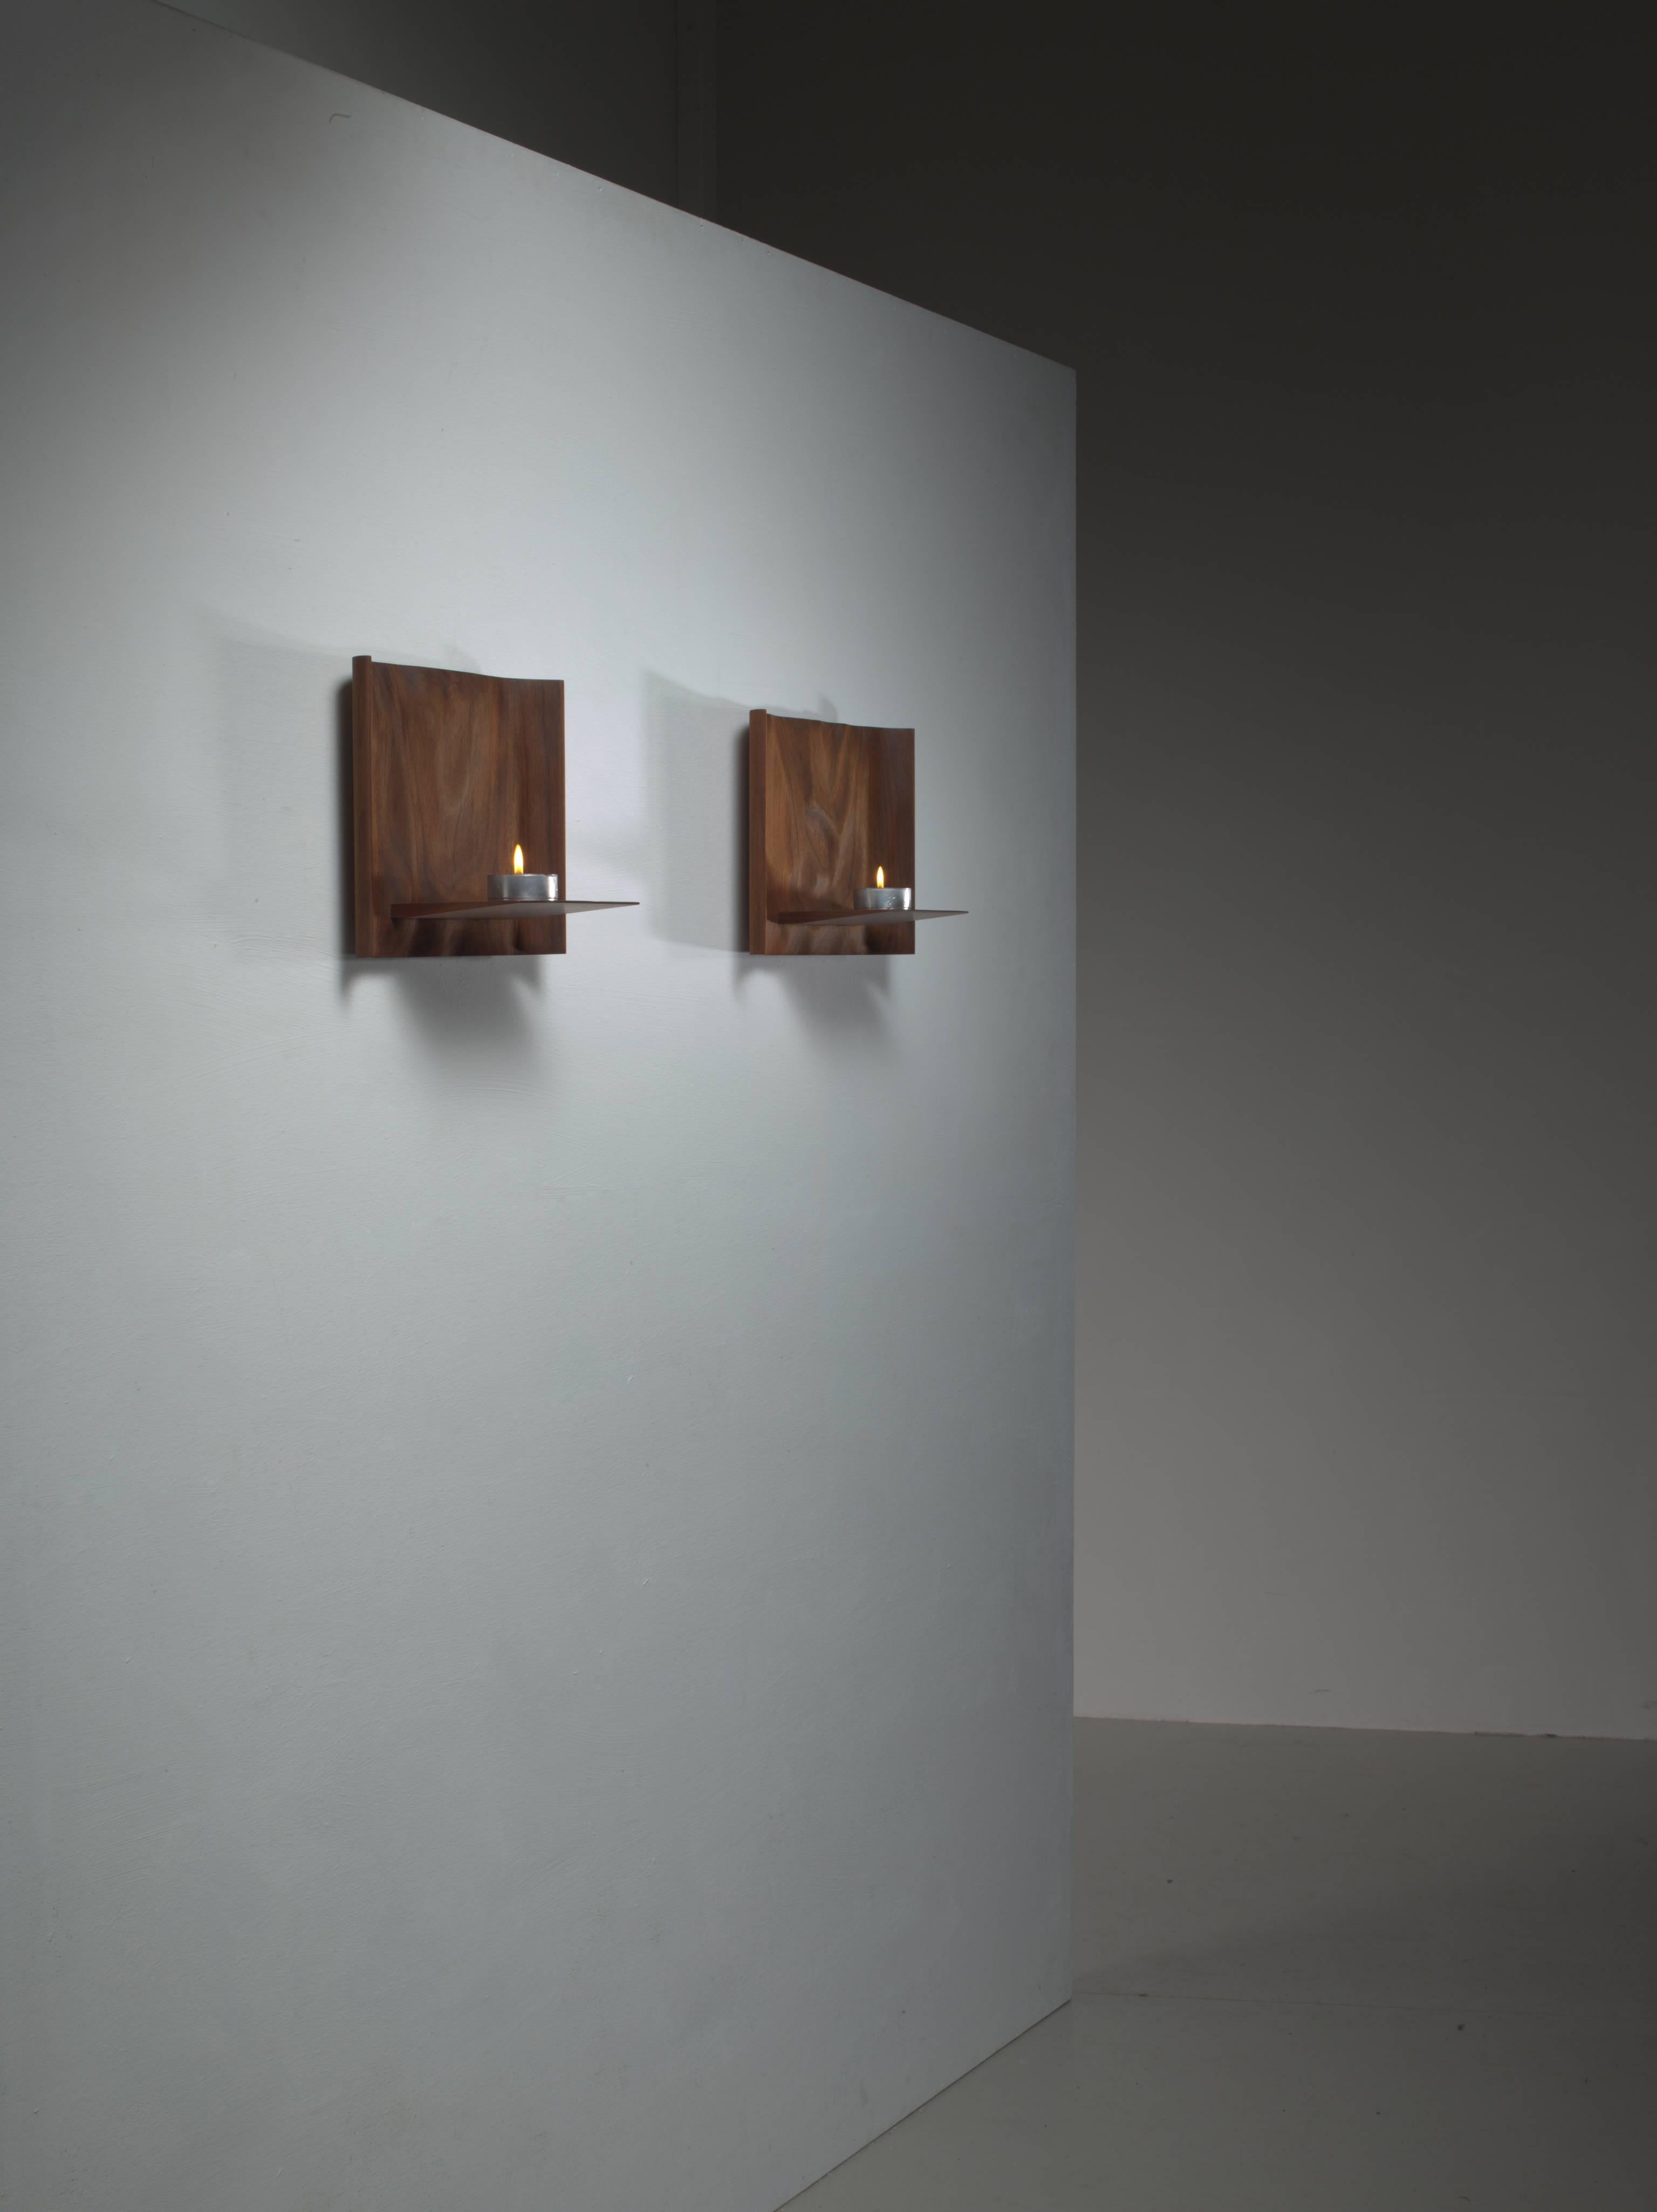 A pair of sculptural walnut wall shelves by American woodworker Roger Sloan. They can also serve as a nightstand.
Signed underneath and in a perfect condition. Reminiscent of the work of Phillip Lloyd Powell.